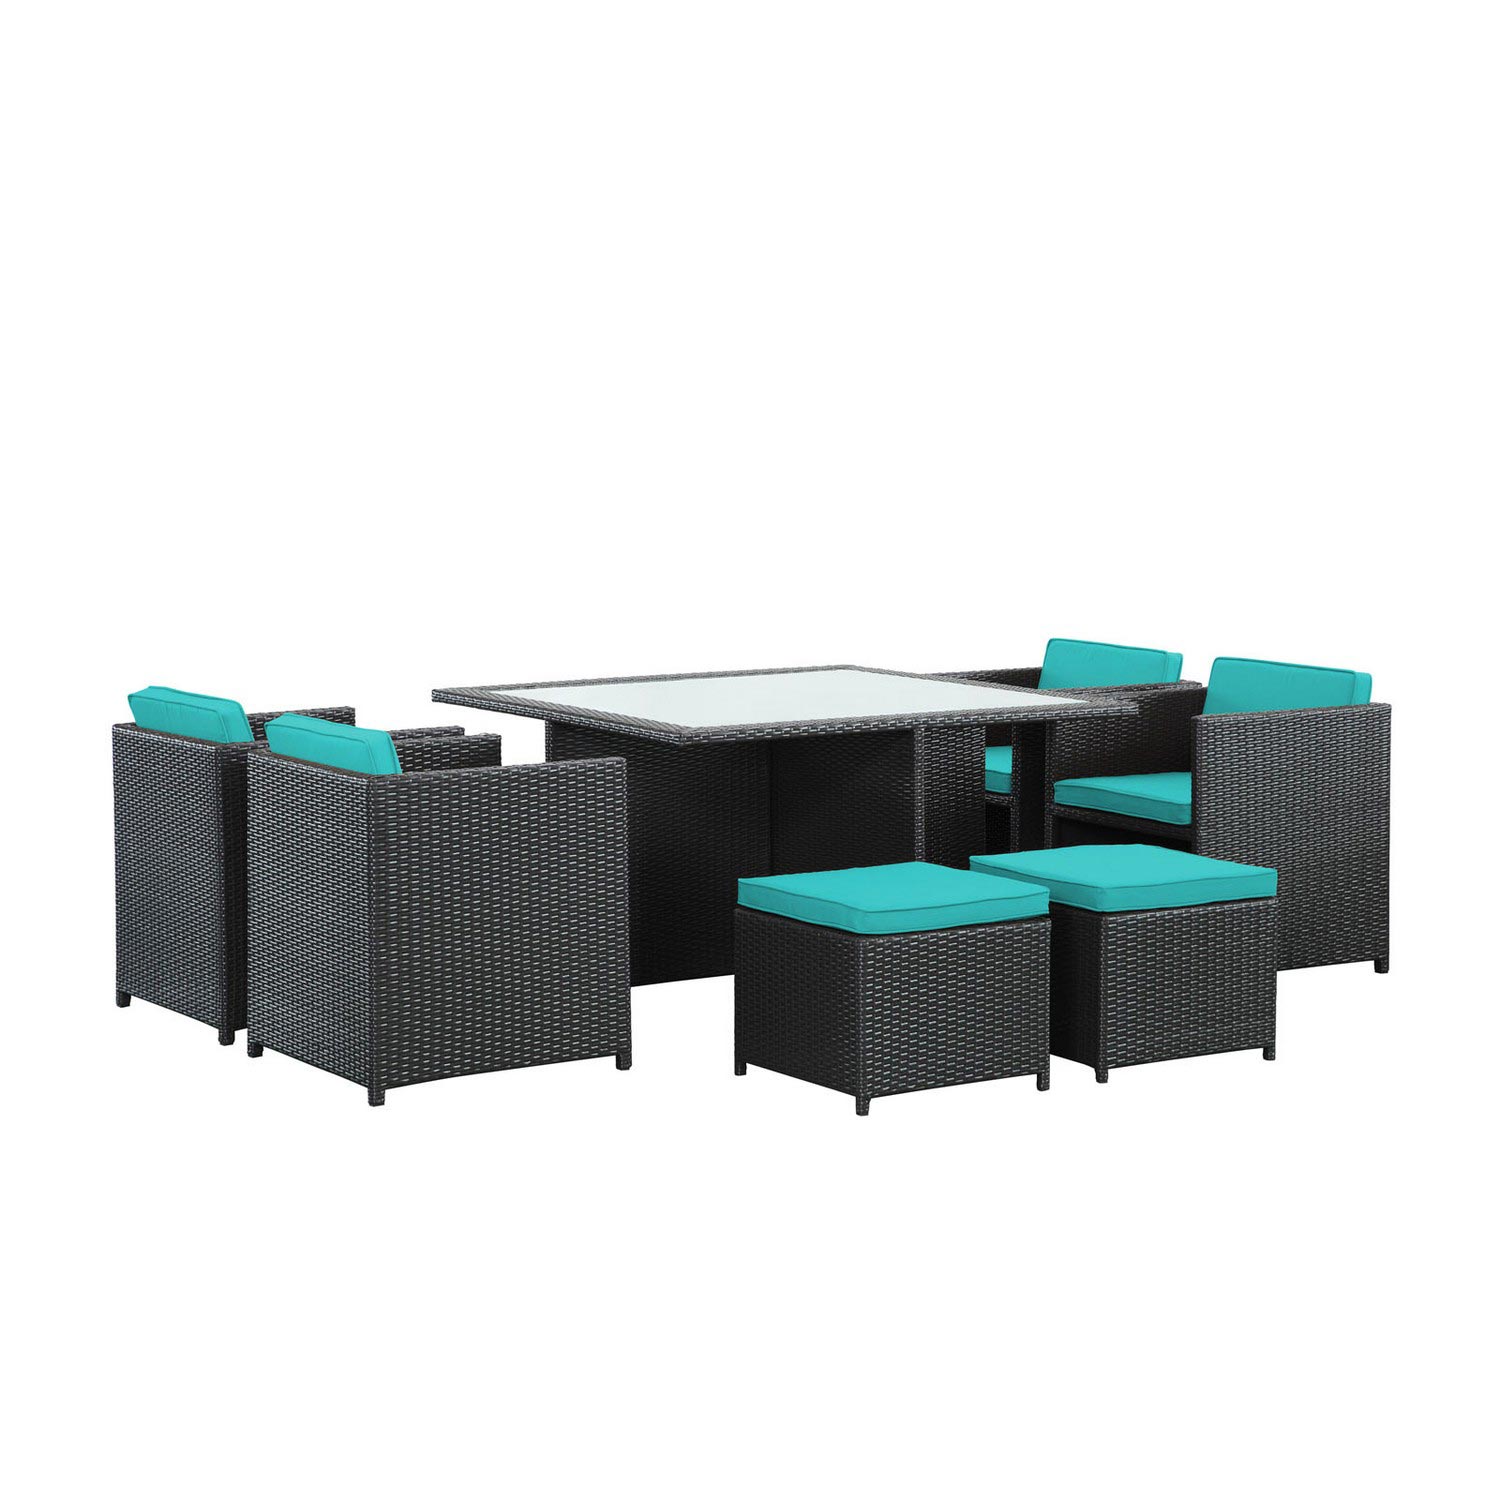 Modway Inverse 9 Piece Outdoor Patio Dining Set - Espresso/Turquoise